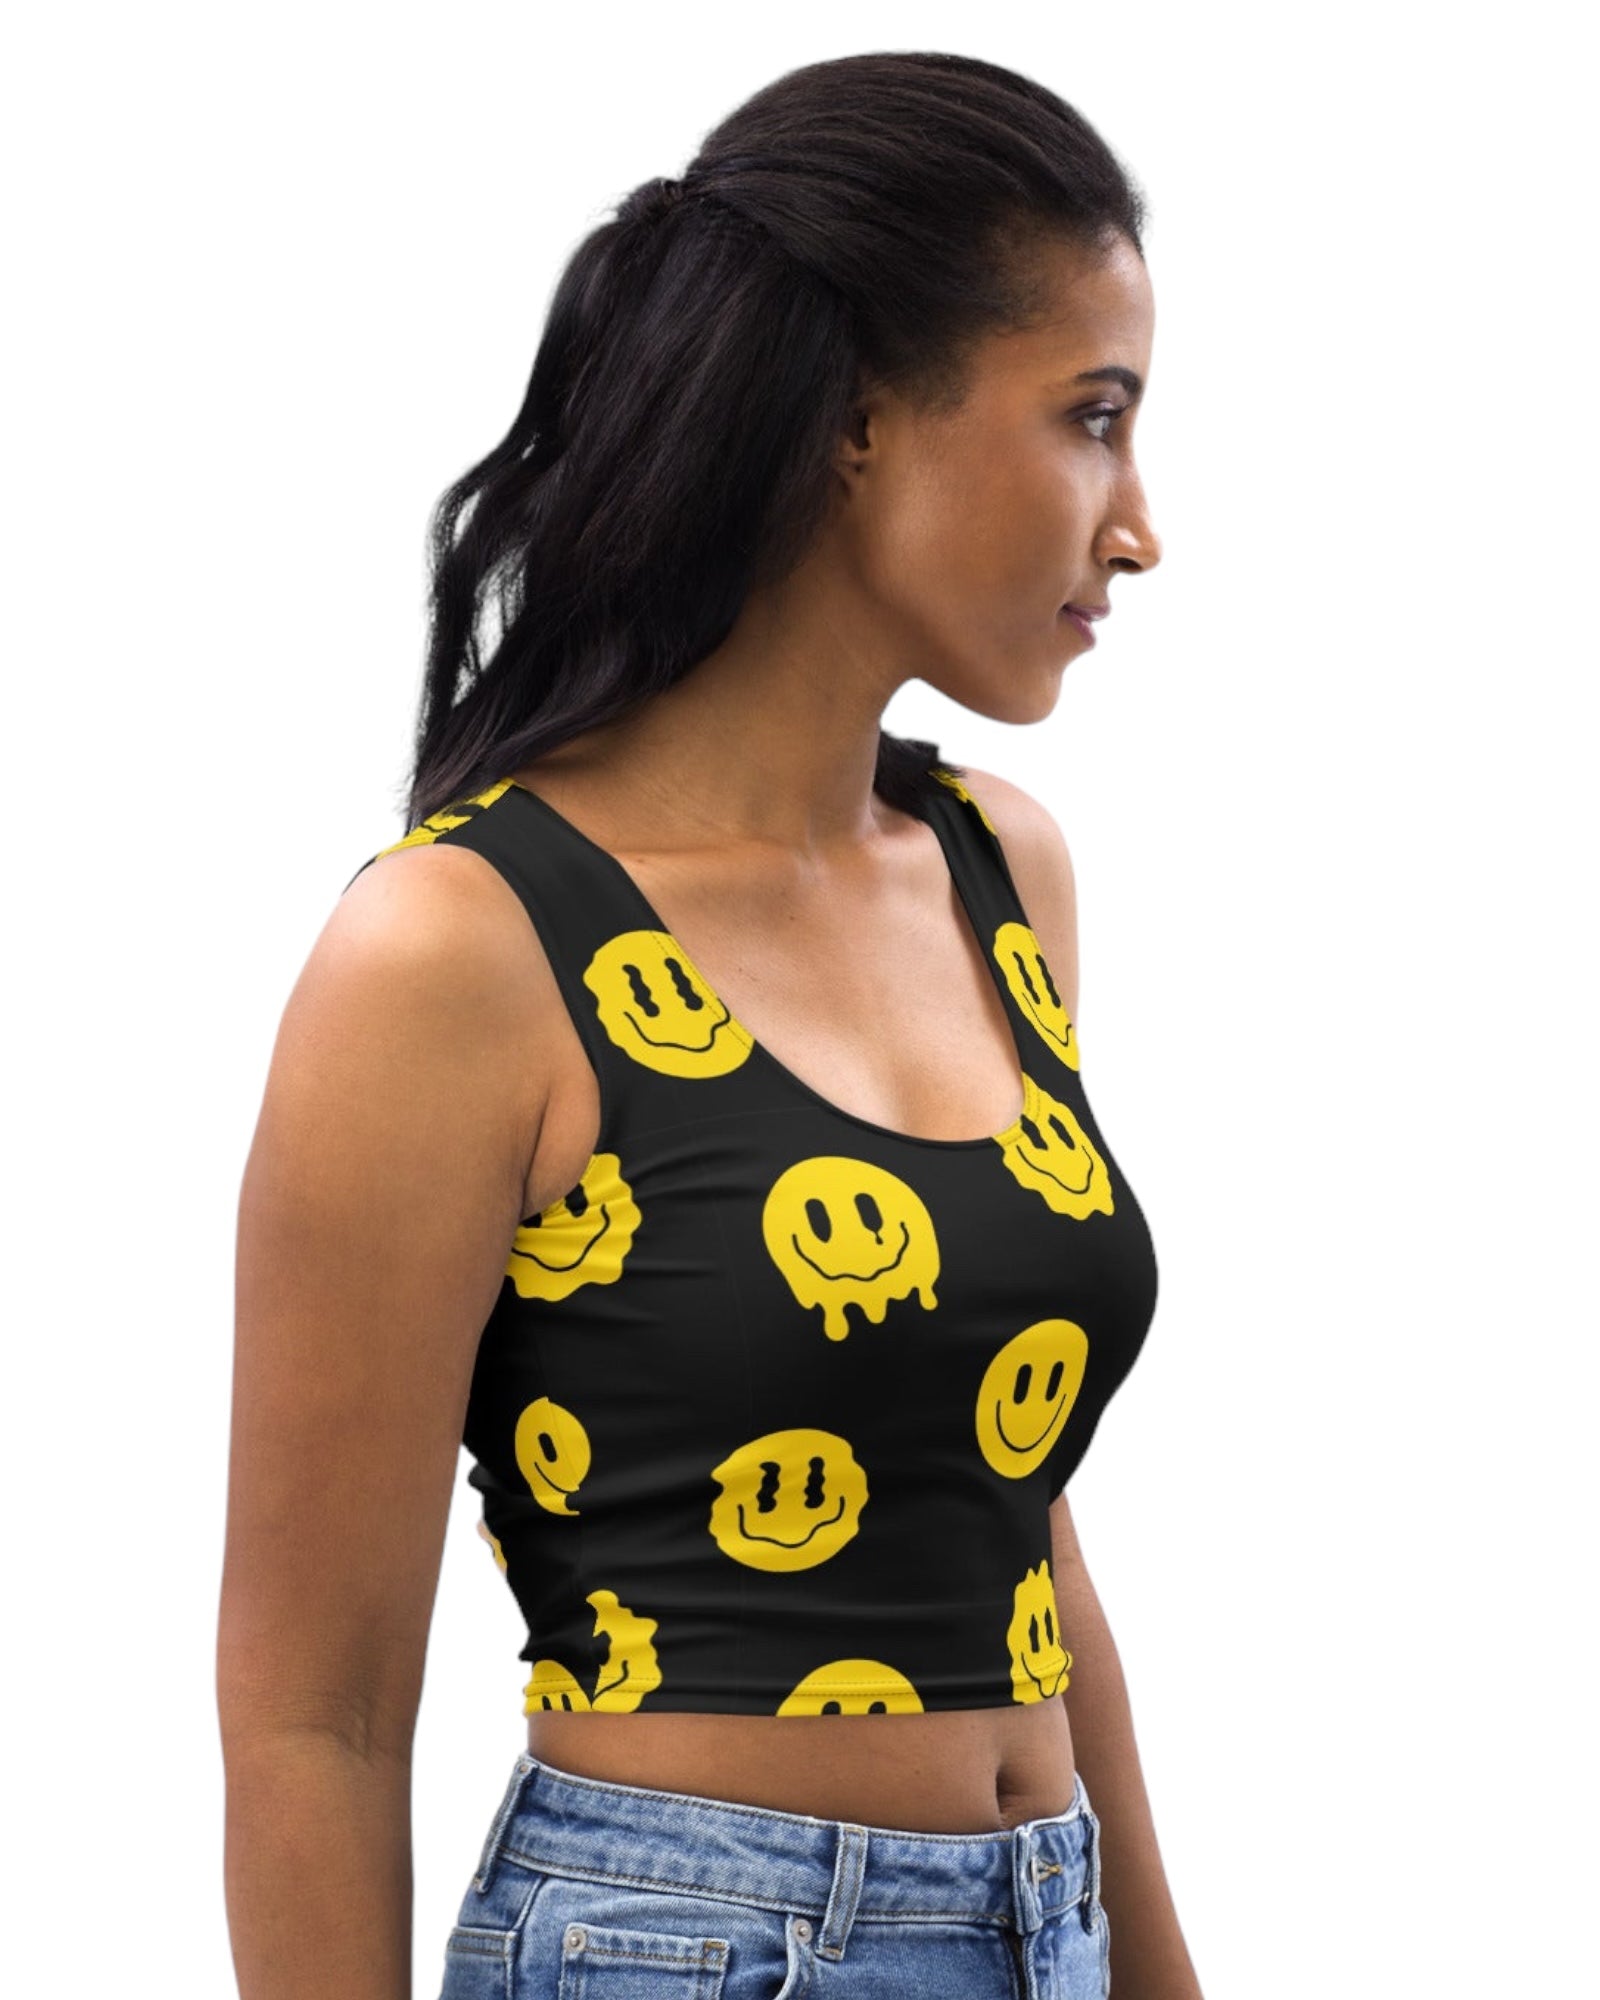 Side view of Trippie Crop Top model - Featuring yellow smiley faces on a black crop top, ideal for festival fashion and rave outfits.